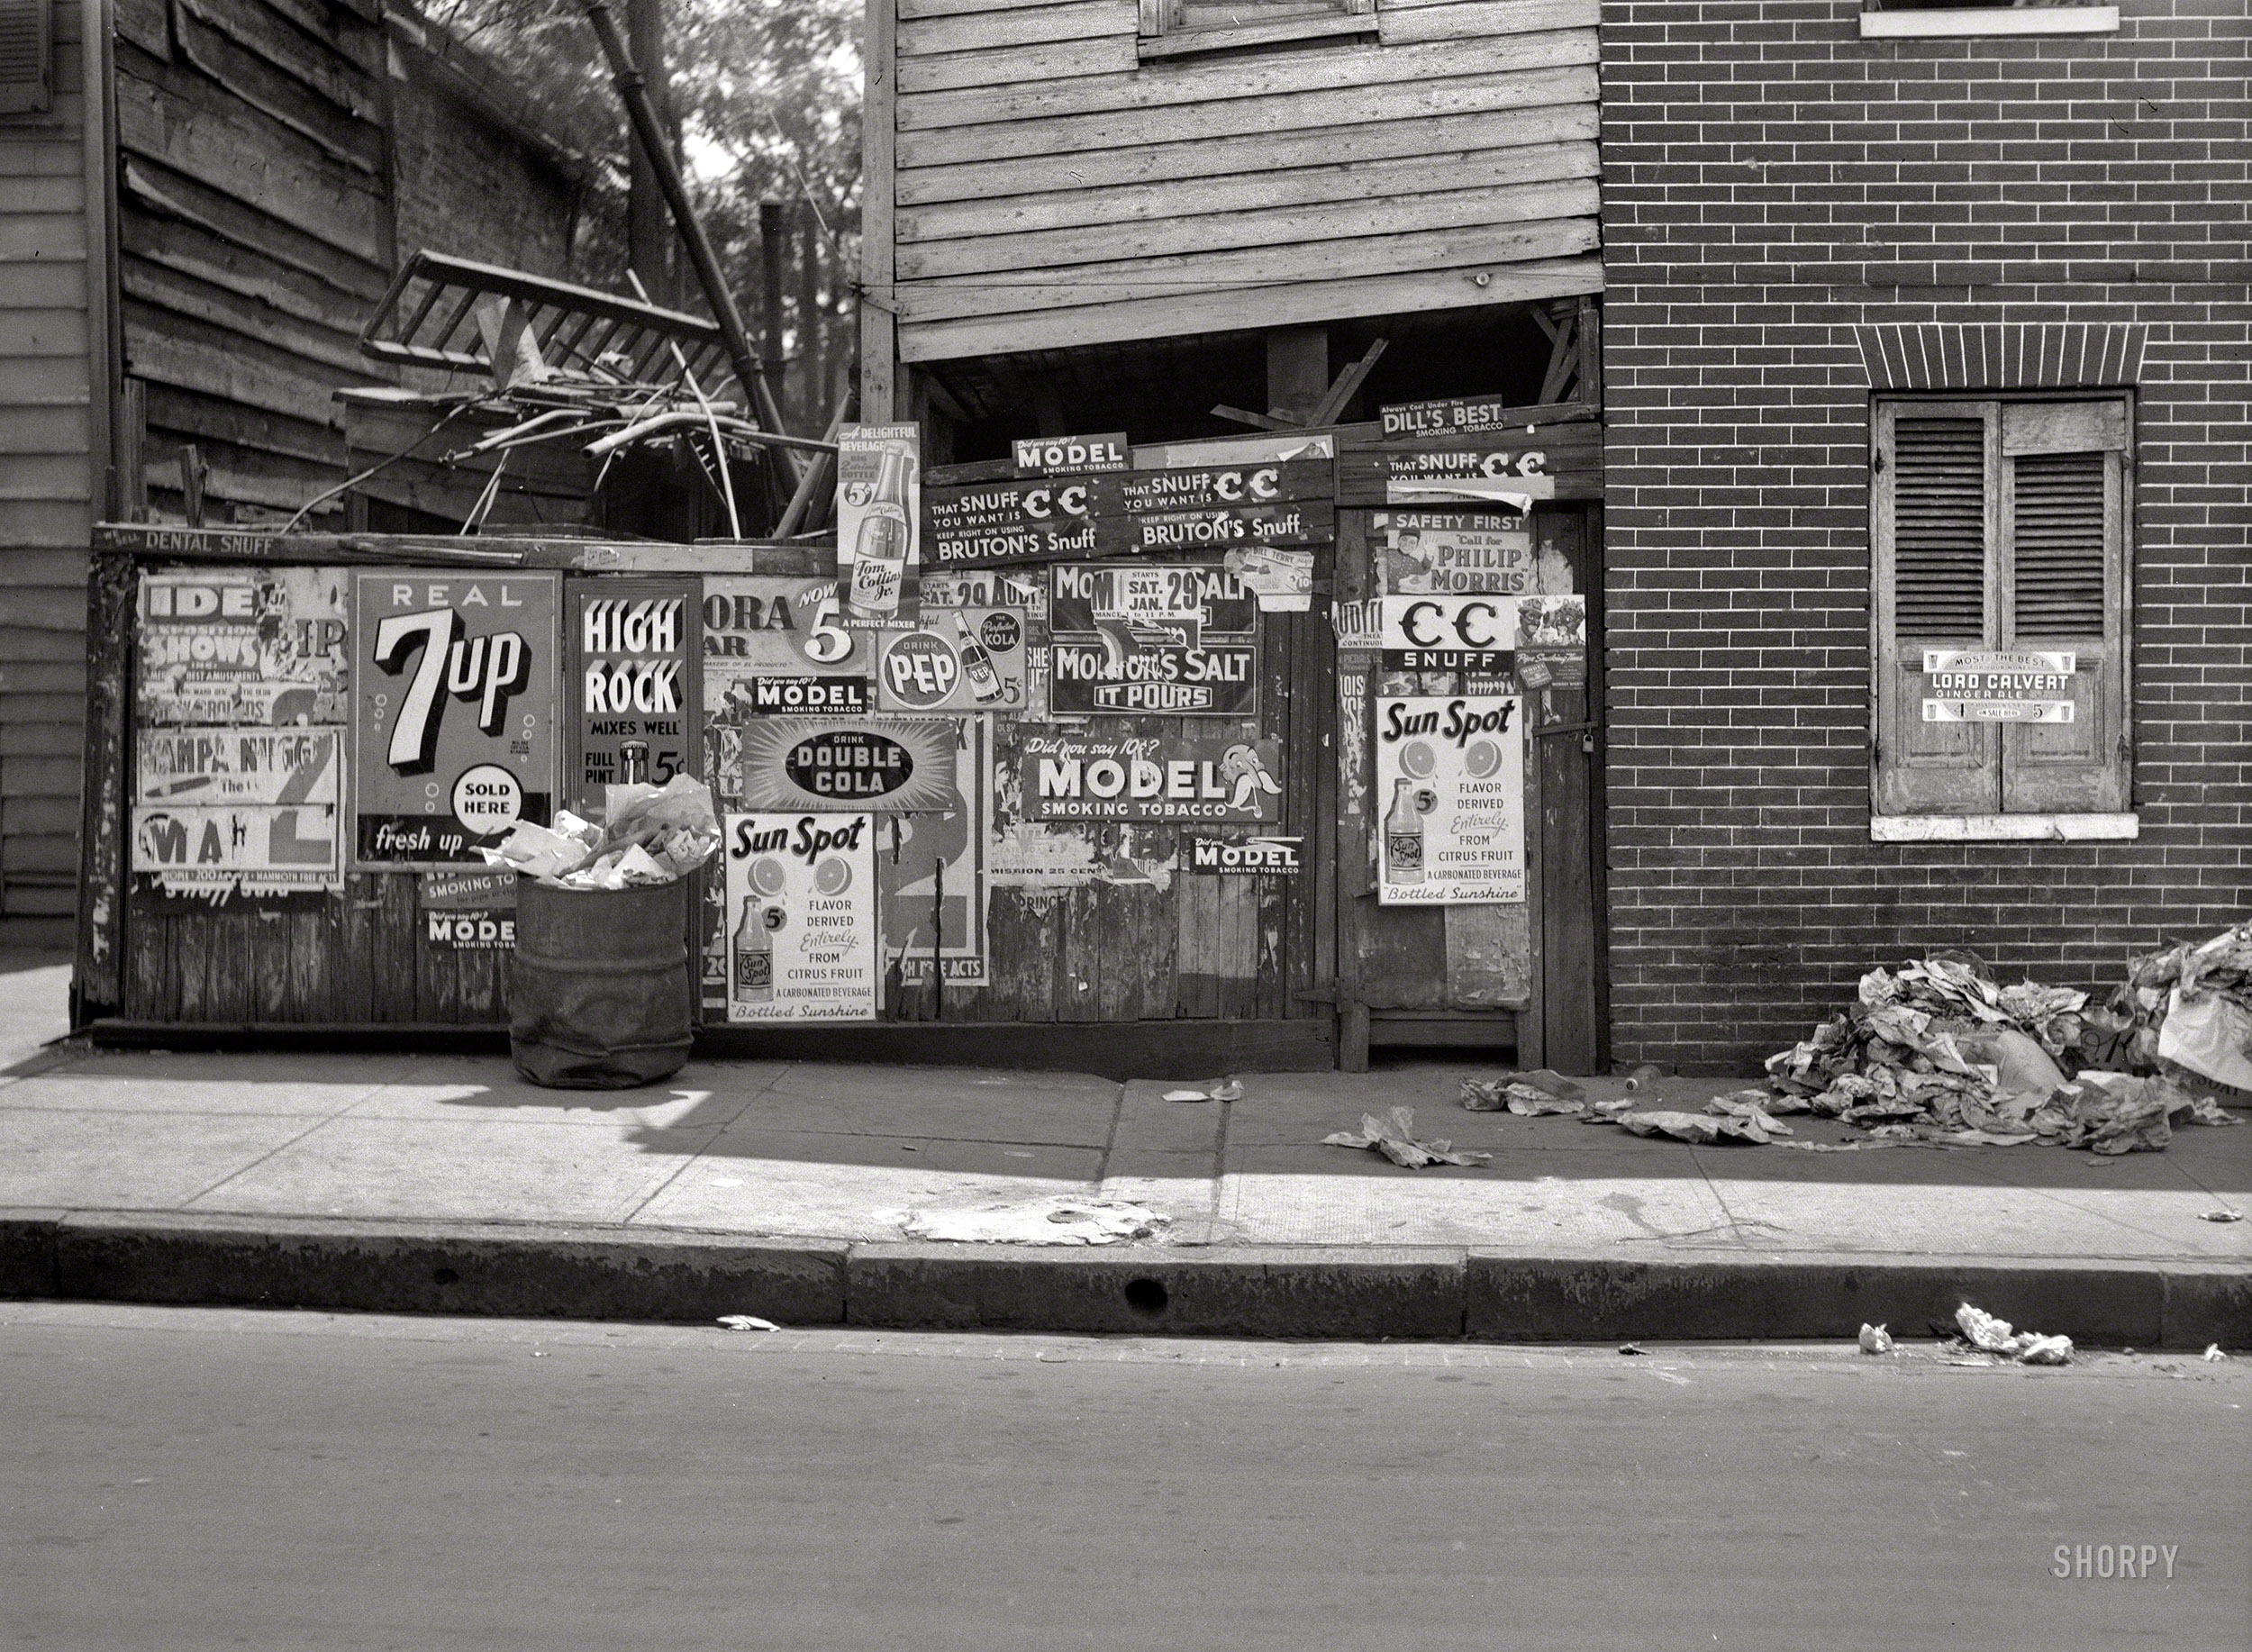 July 1938. "Rear of grocery store in Baltimore." Only hinting at the delights that await within. Medium format nitrate negative by John Vachon. View full size.